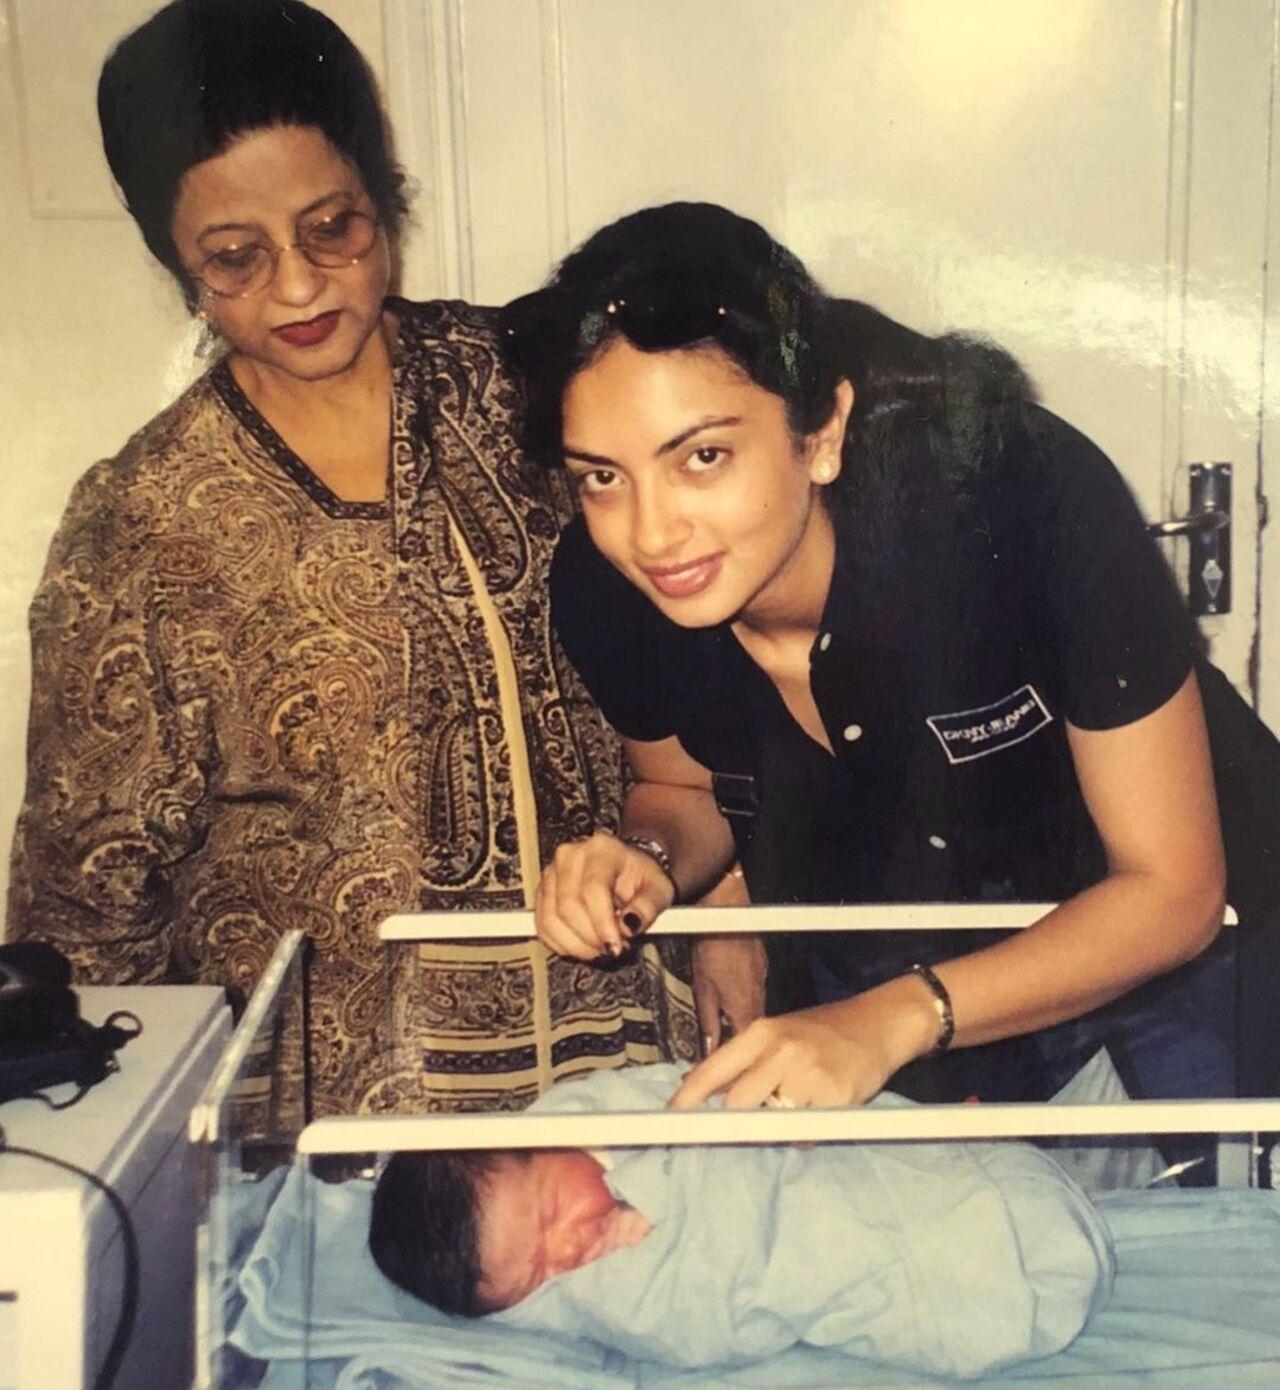 They often share throwback pictures from the good old times. Maheep had shared this picture of Seema coming to visit her child after delivery in the hospital